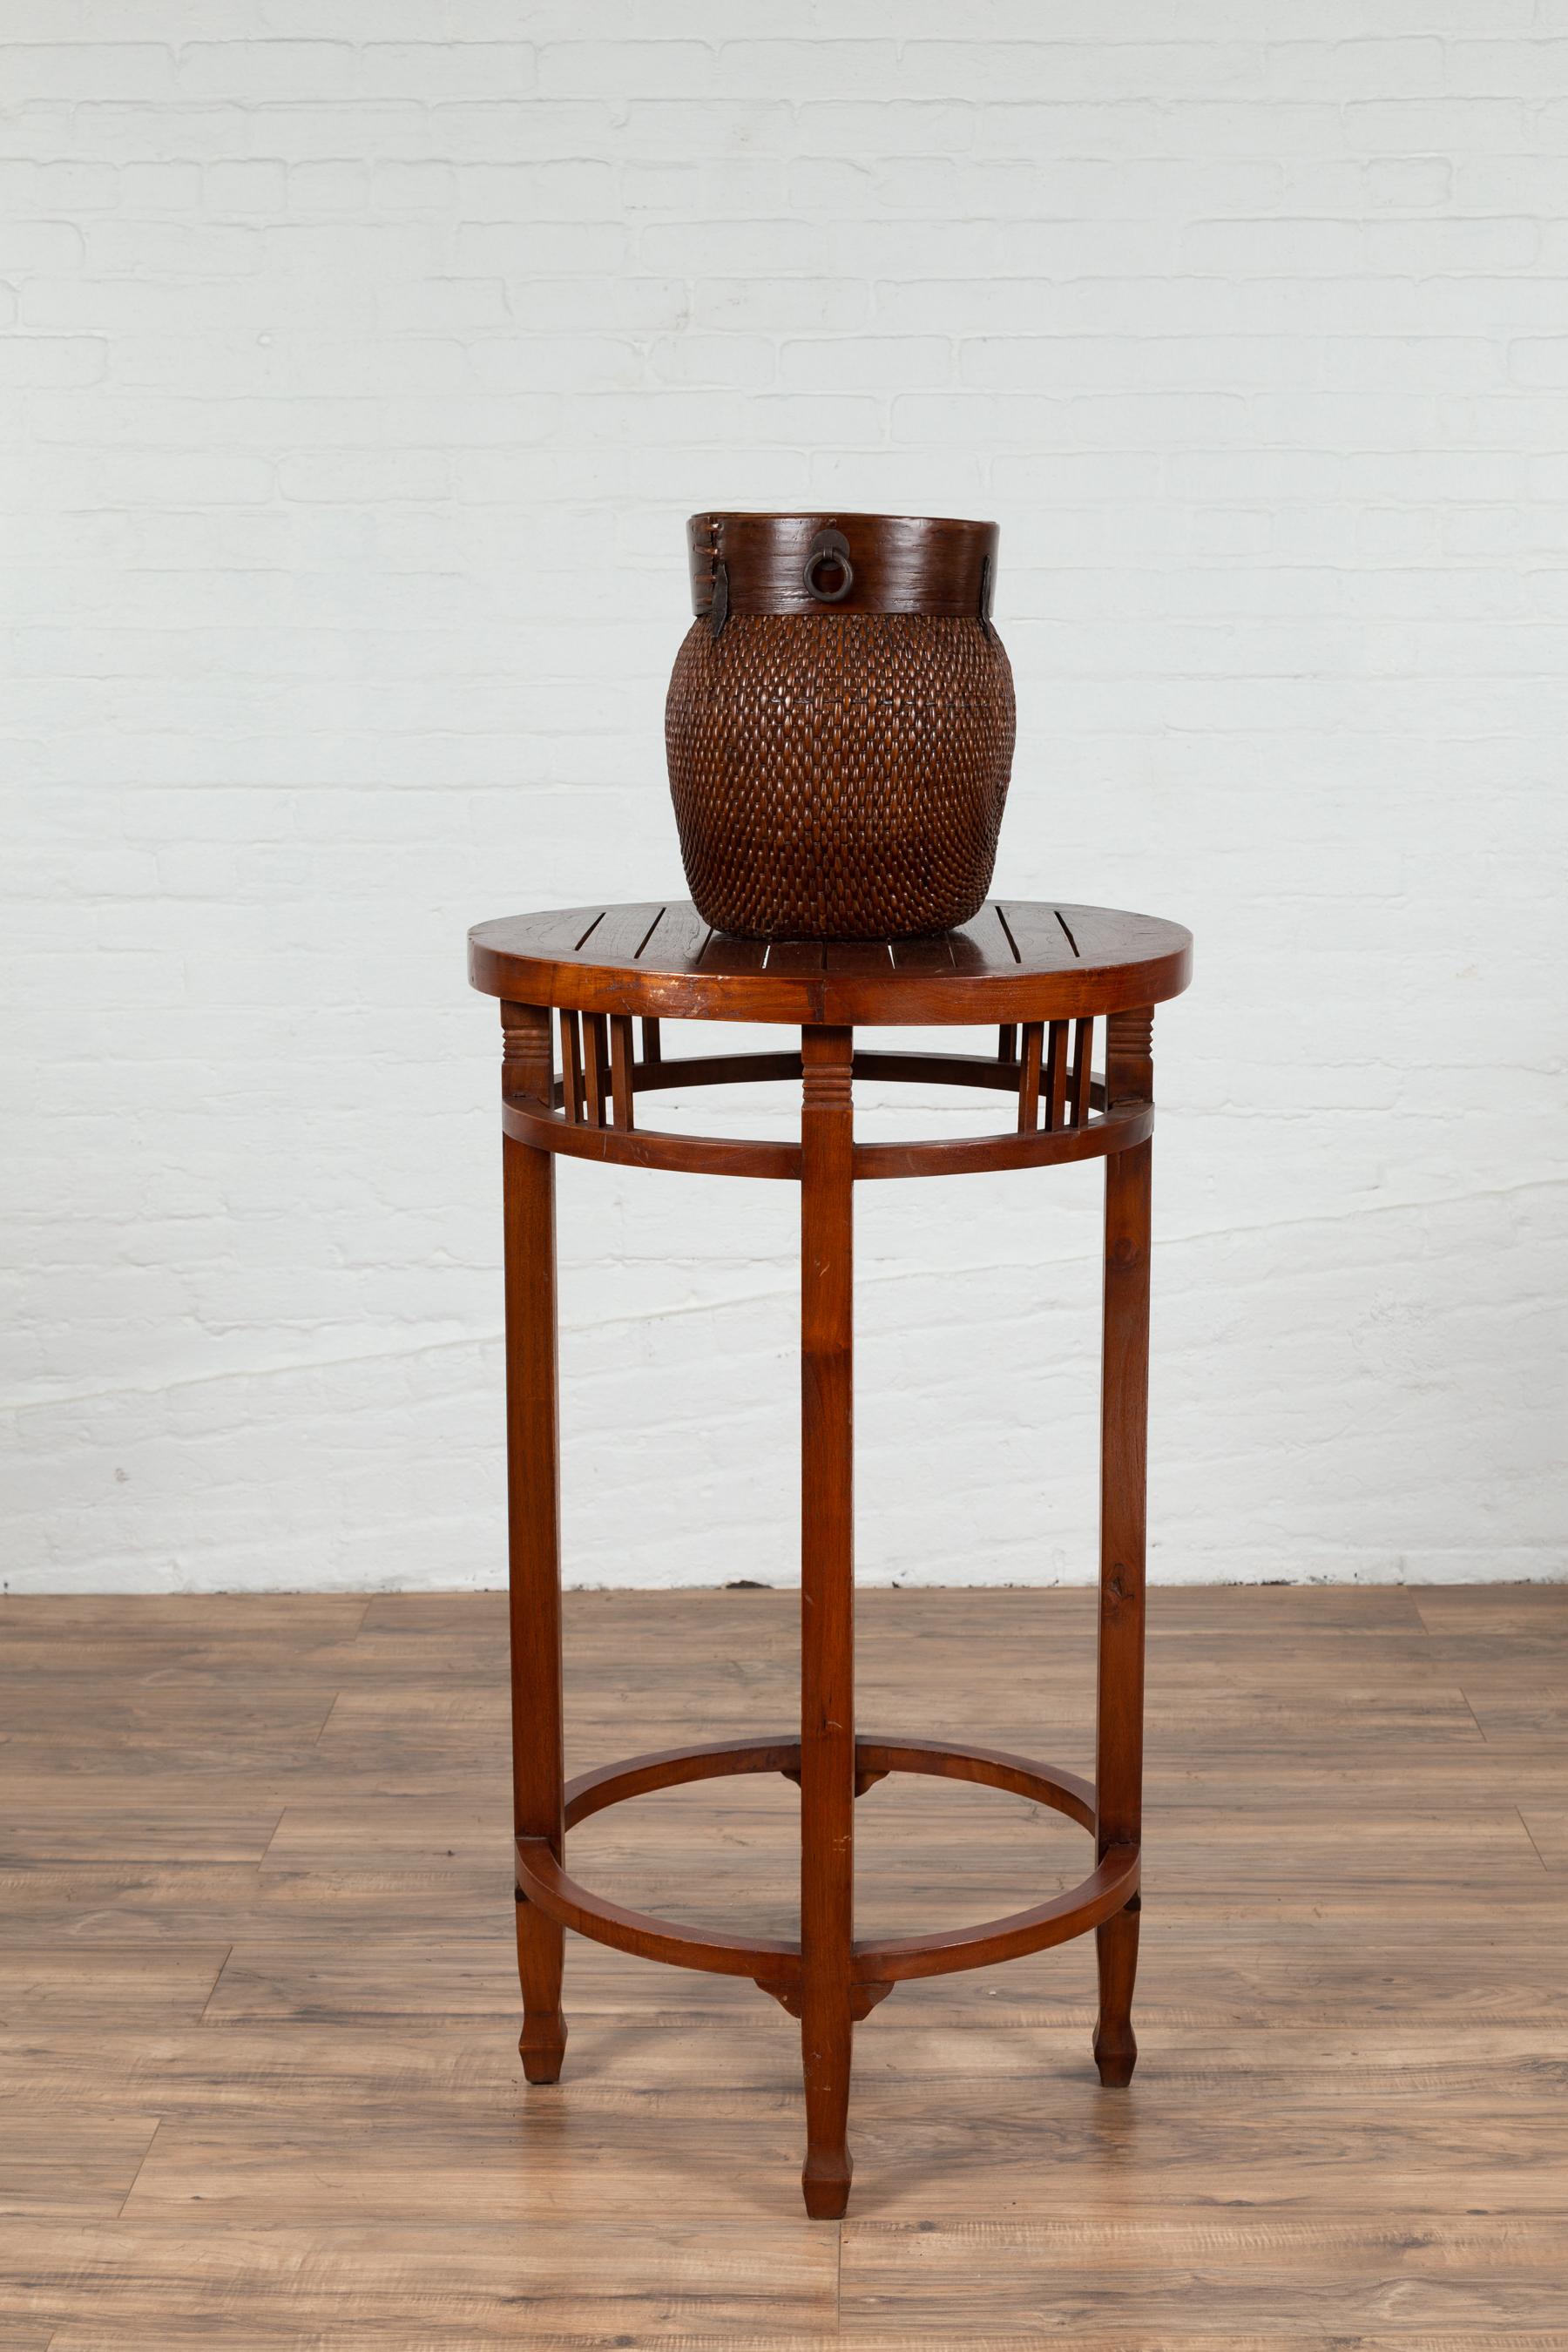 A 19th century Indonesian tall round pedestal table with pierced apron and side stretchers. Found in Java, this elegant pedestal features a circular slatted top sitting above a pierced apron adorned with pillar strut motifs. Four legs, connected to